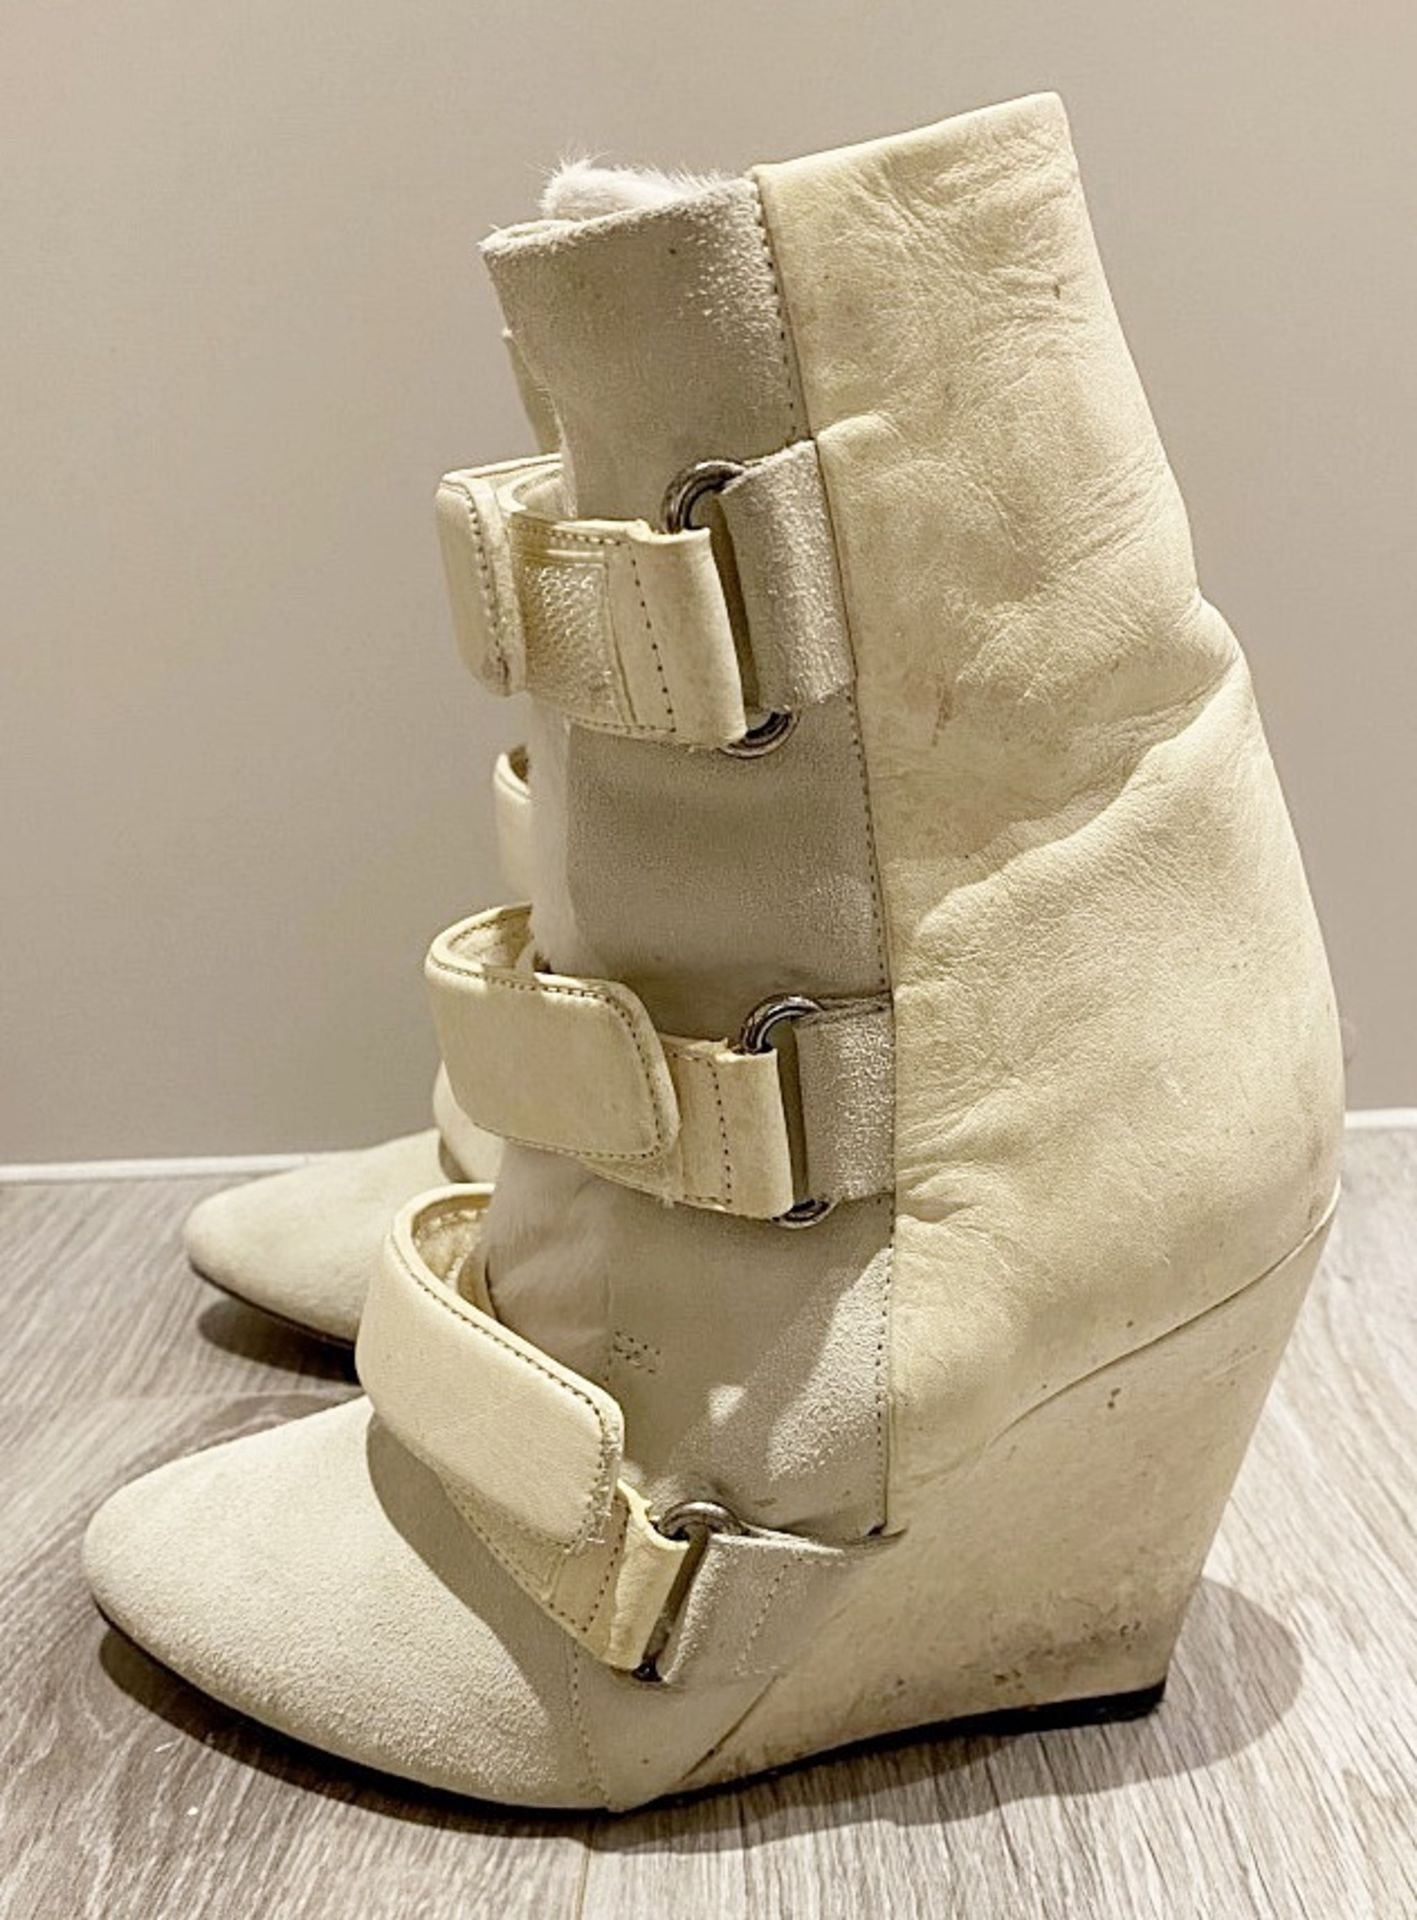 1 x Pair Of Genuine Isabel Marant Boots In Crème And Fur - Size: 37 - Preowned in Very Good Conditio